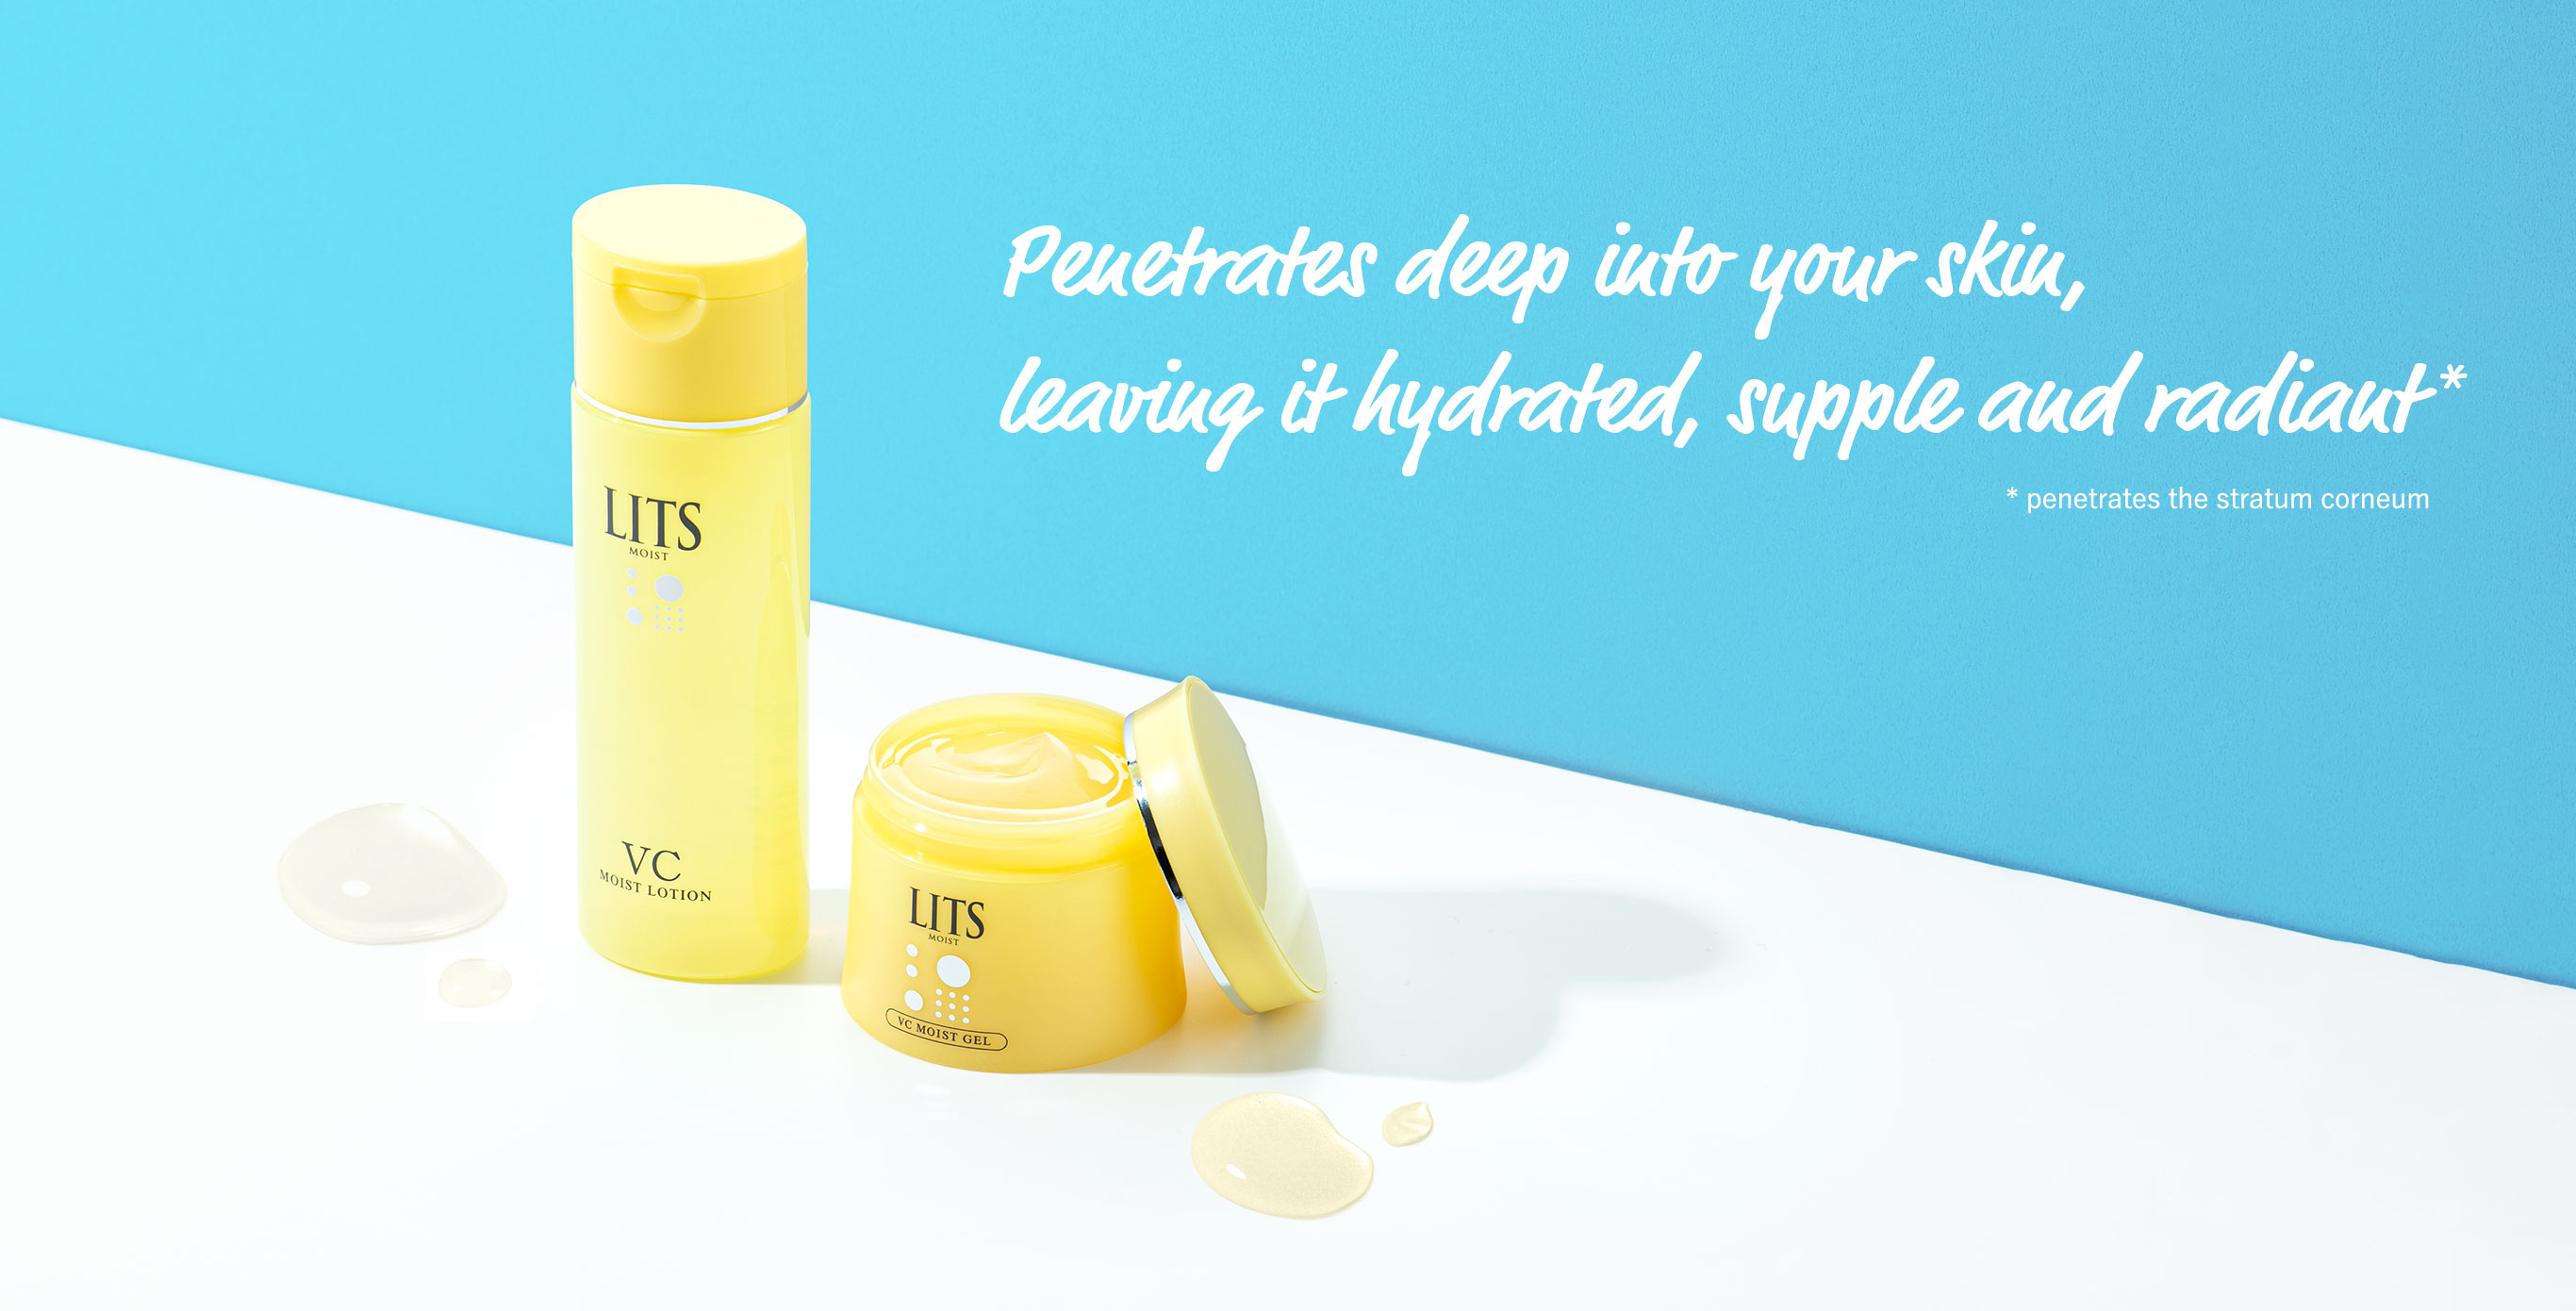 Penetrates deep into your skin, leaving it hydrated, supple and radiant